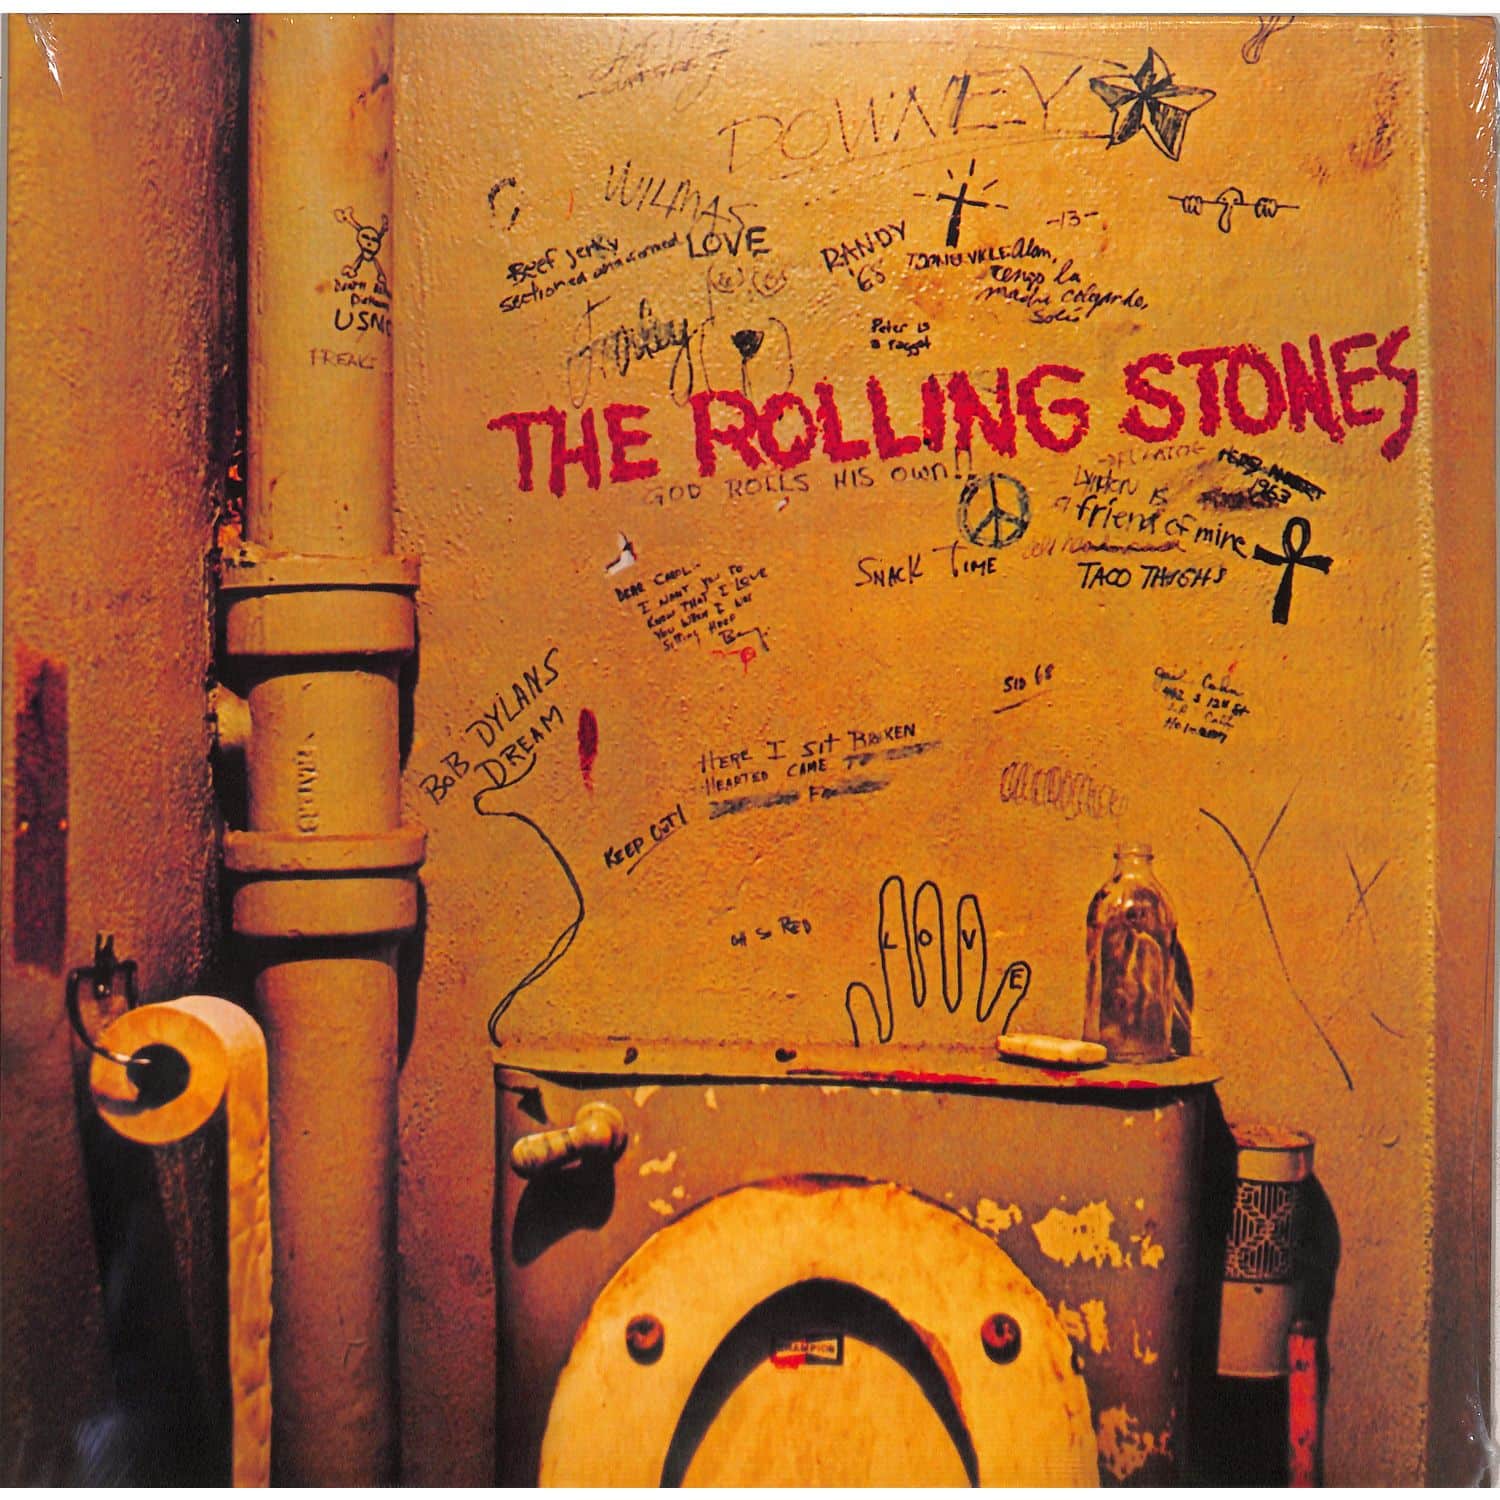 The Rolling Stones - BEGGARS BANQUET 